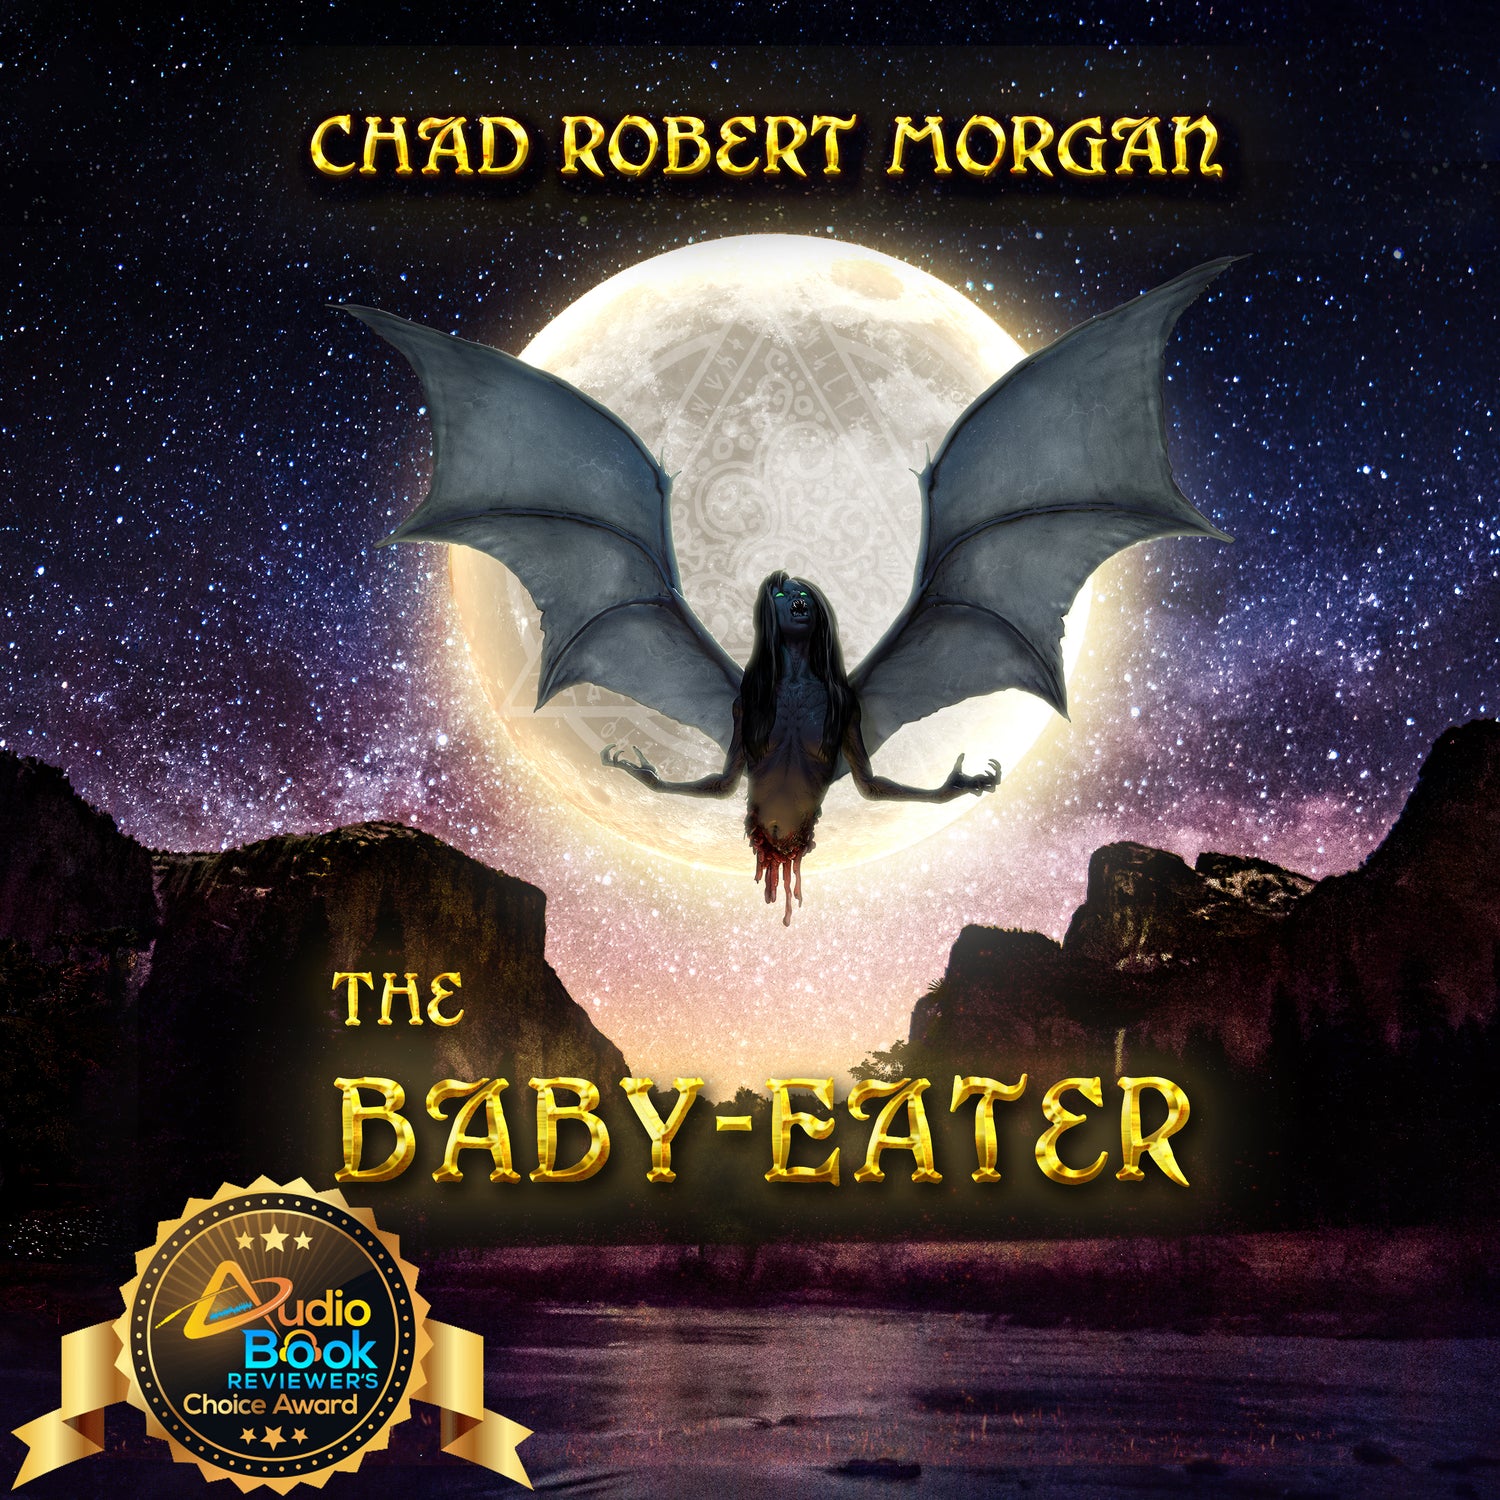 The Baby-Eater, winner of Audiobook Reviewer's Chocie Award. Available in print, audiobook, and ebook